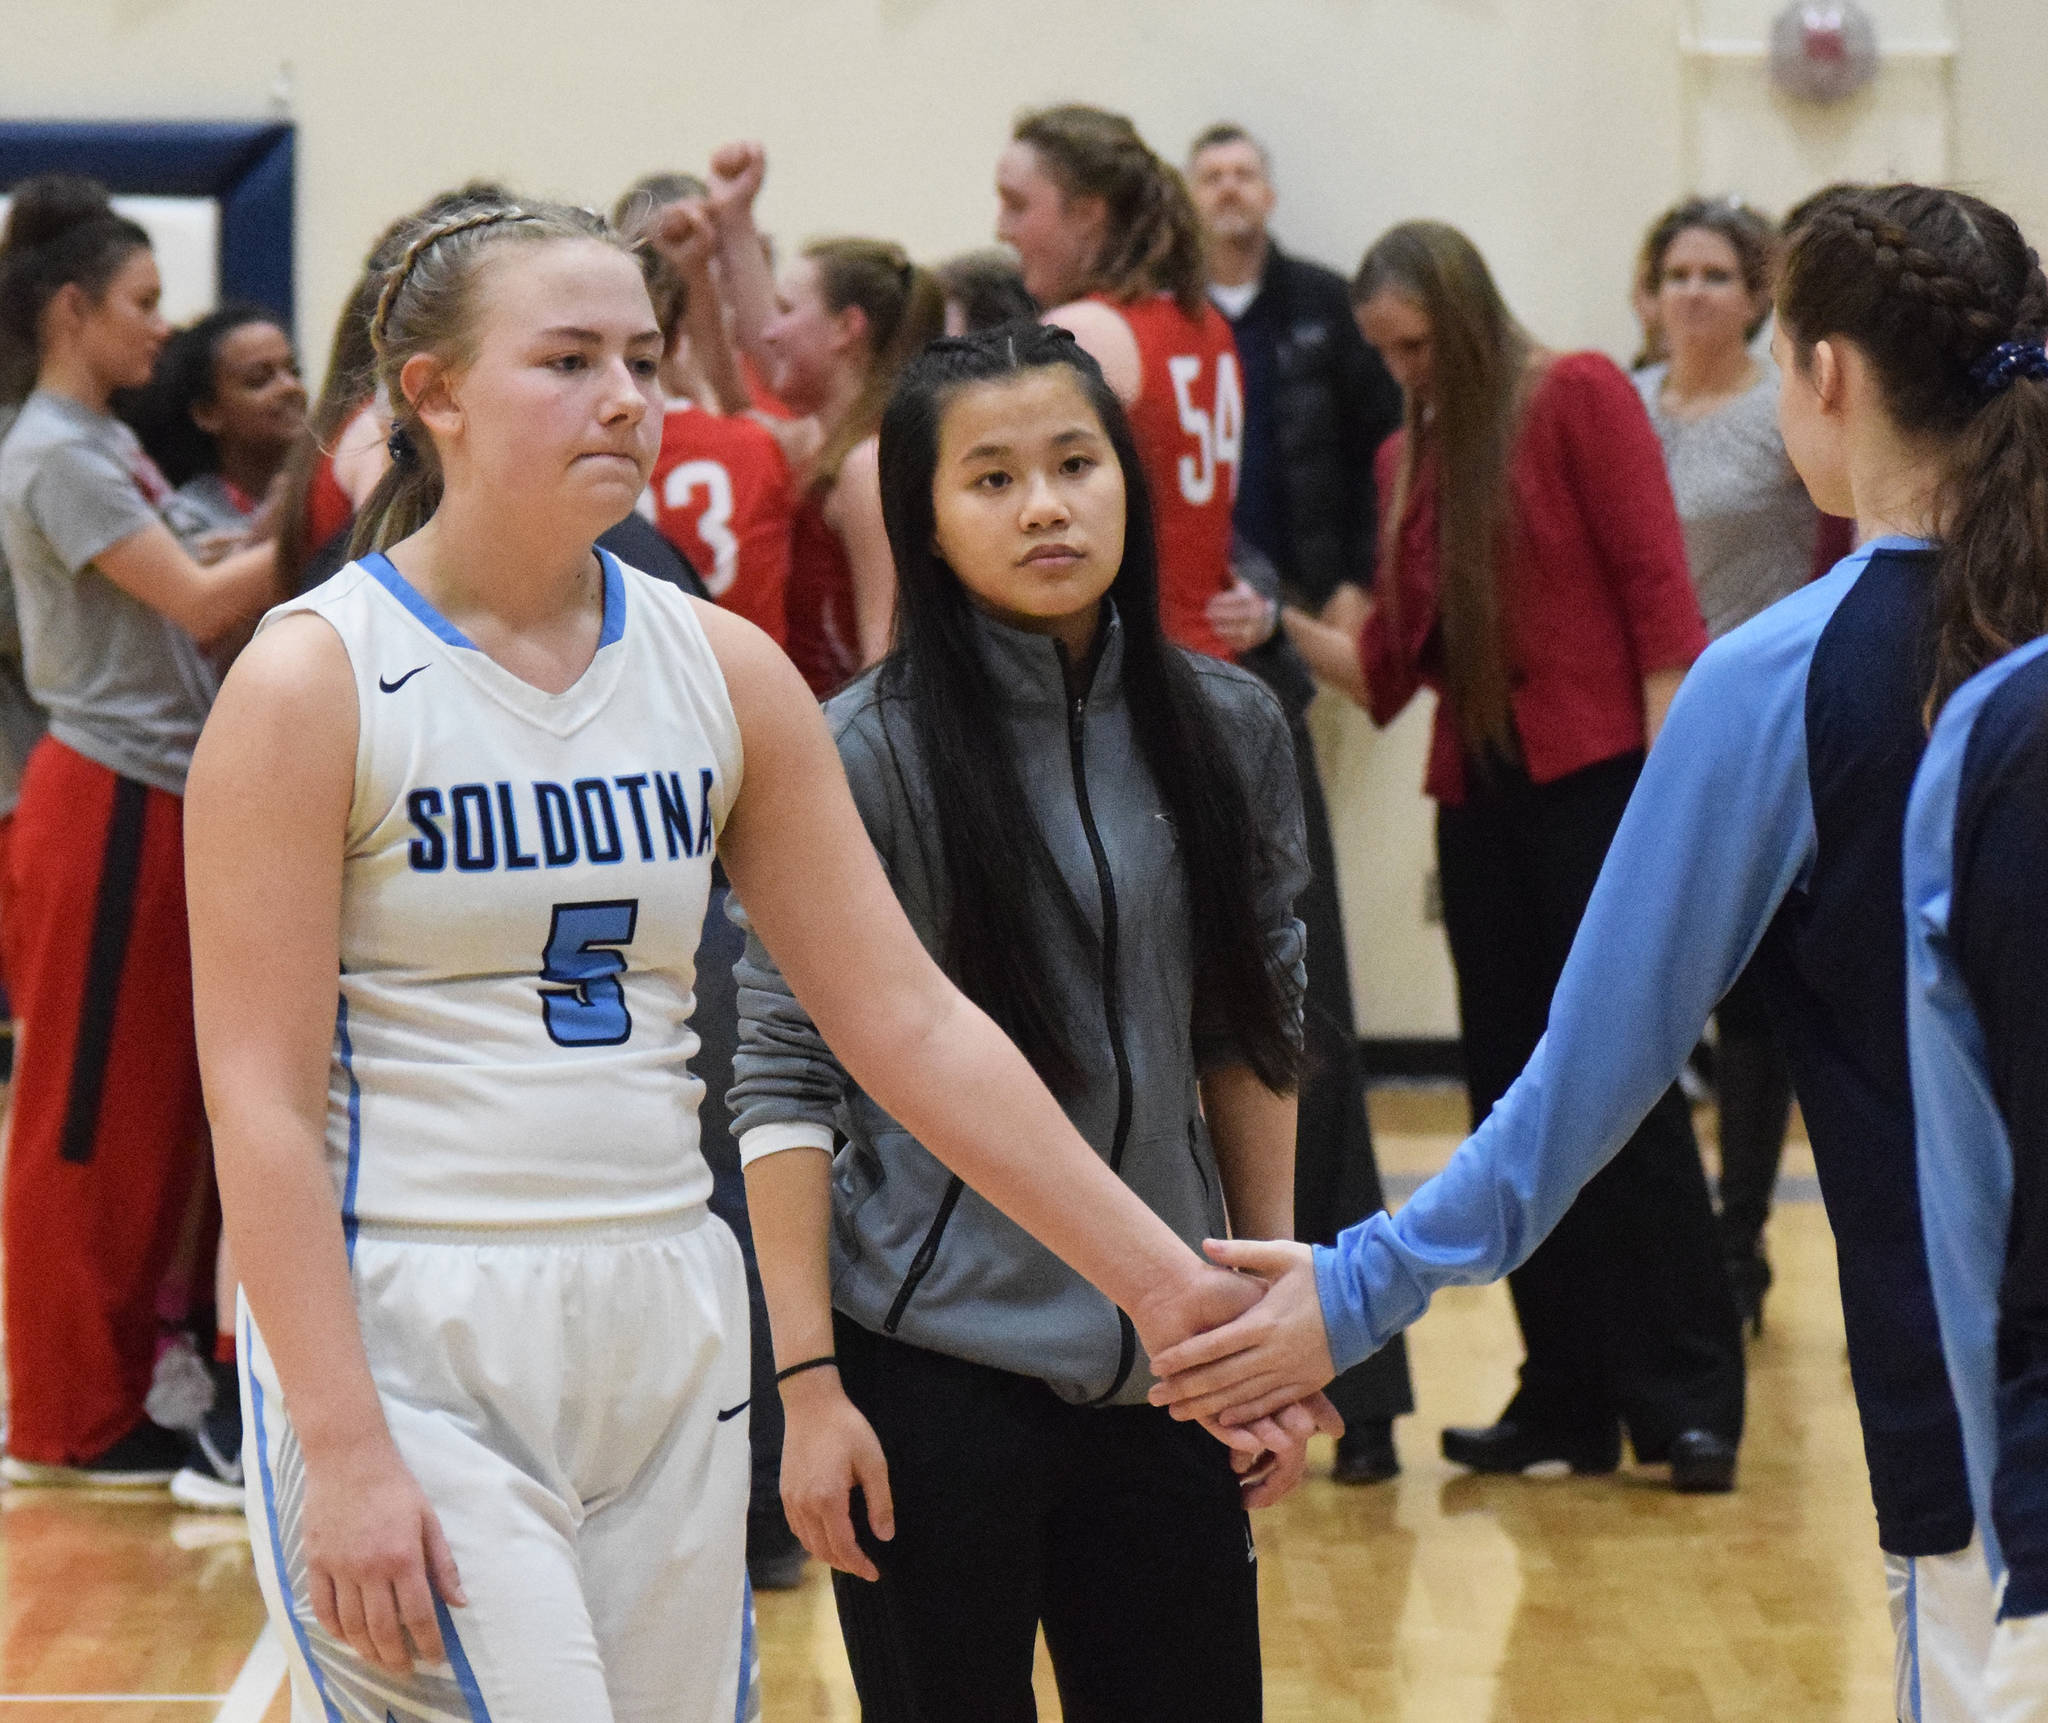 Soldotna senior Brittani Blossom (5) receives a comforting gesture following Soldotna’s loss to Wasilla in Saturday’s Northern Lights Conference girls championship game at Soldotna High School. (Photo by Joey Klecka/Peninsula Clarion)